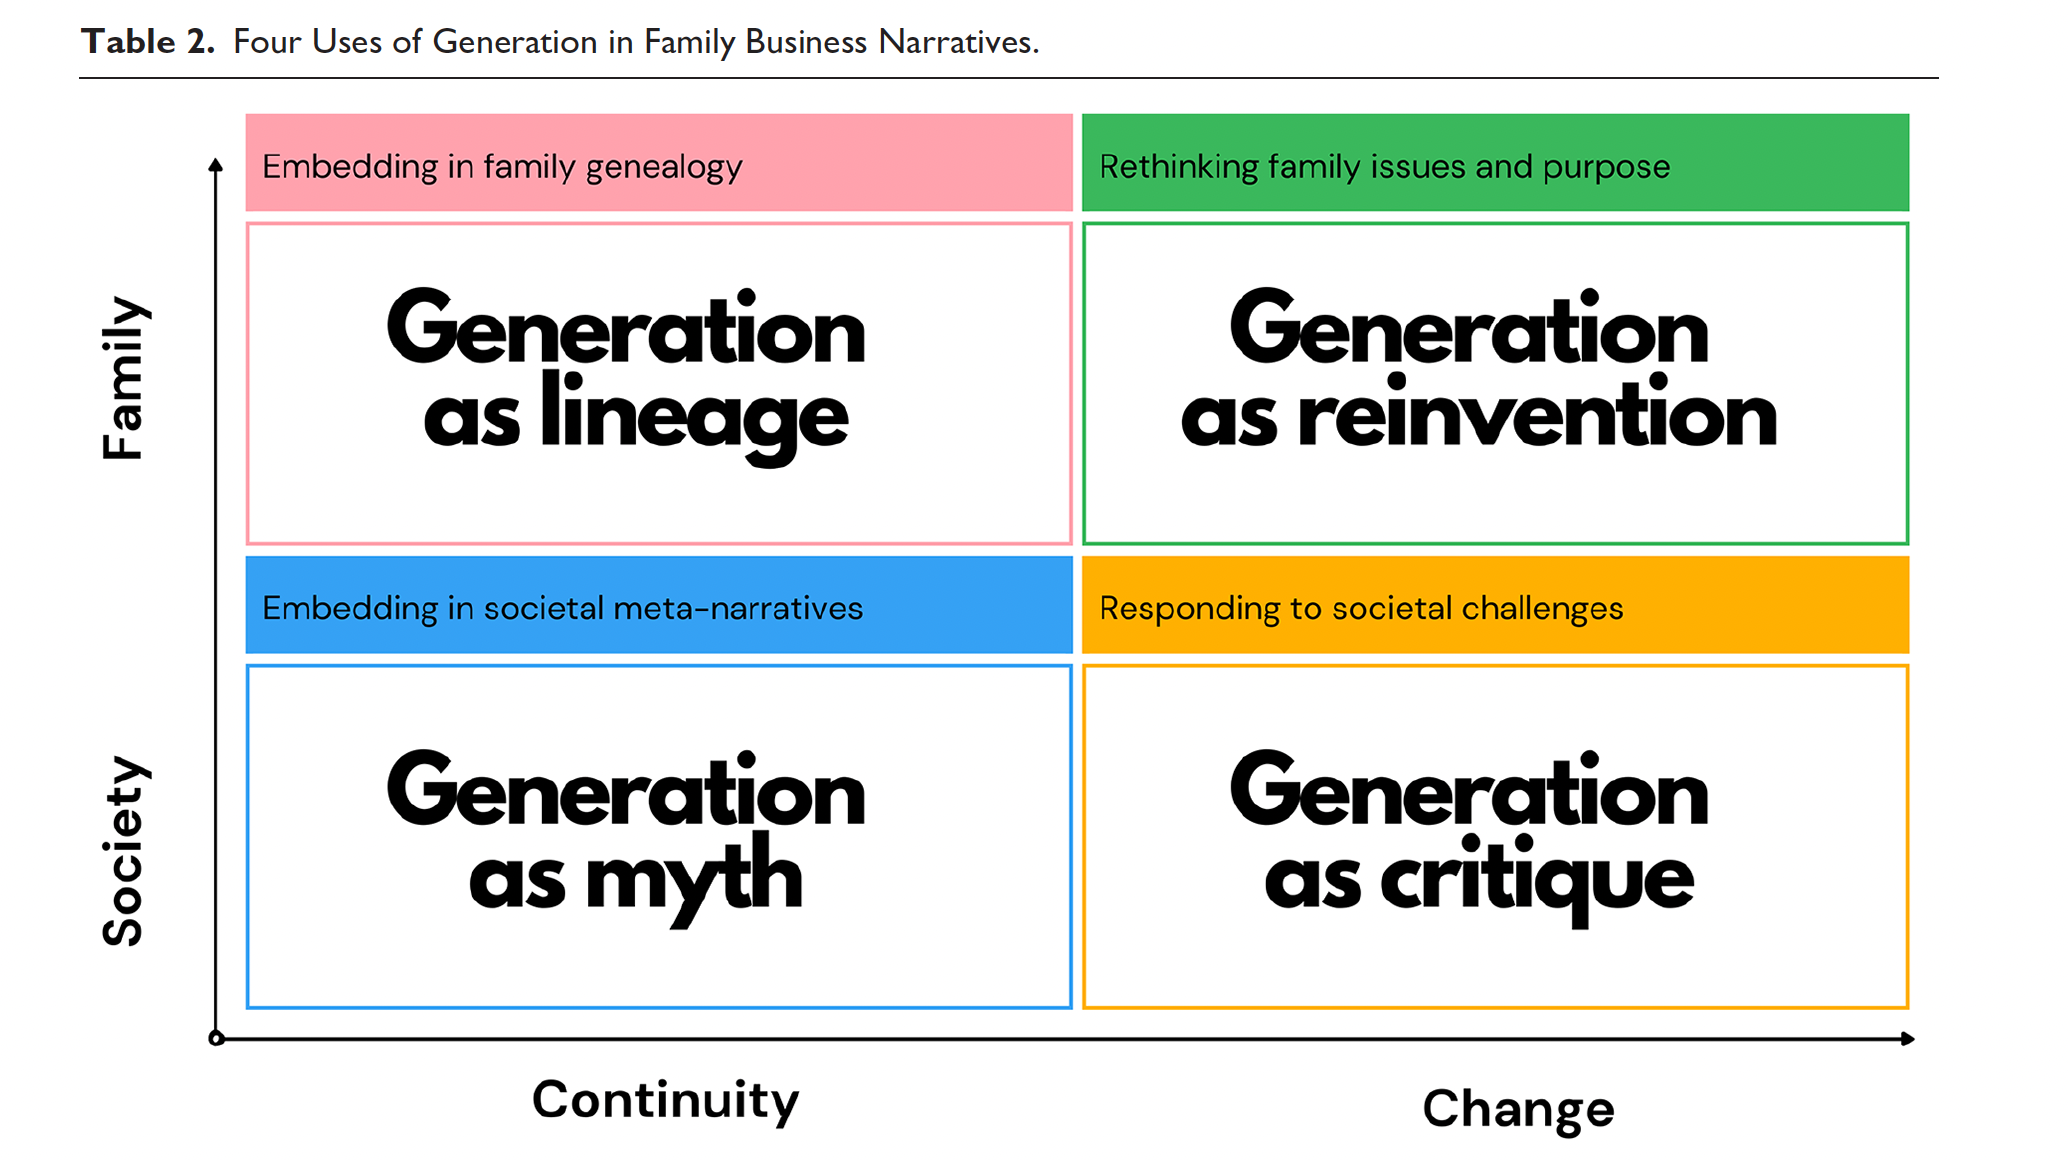 Table: 4 uses of generation in family businesses